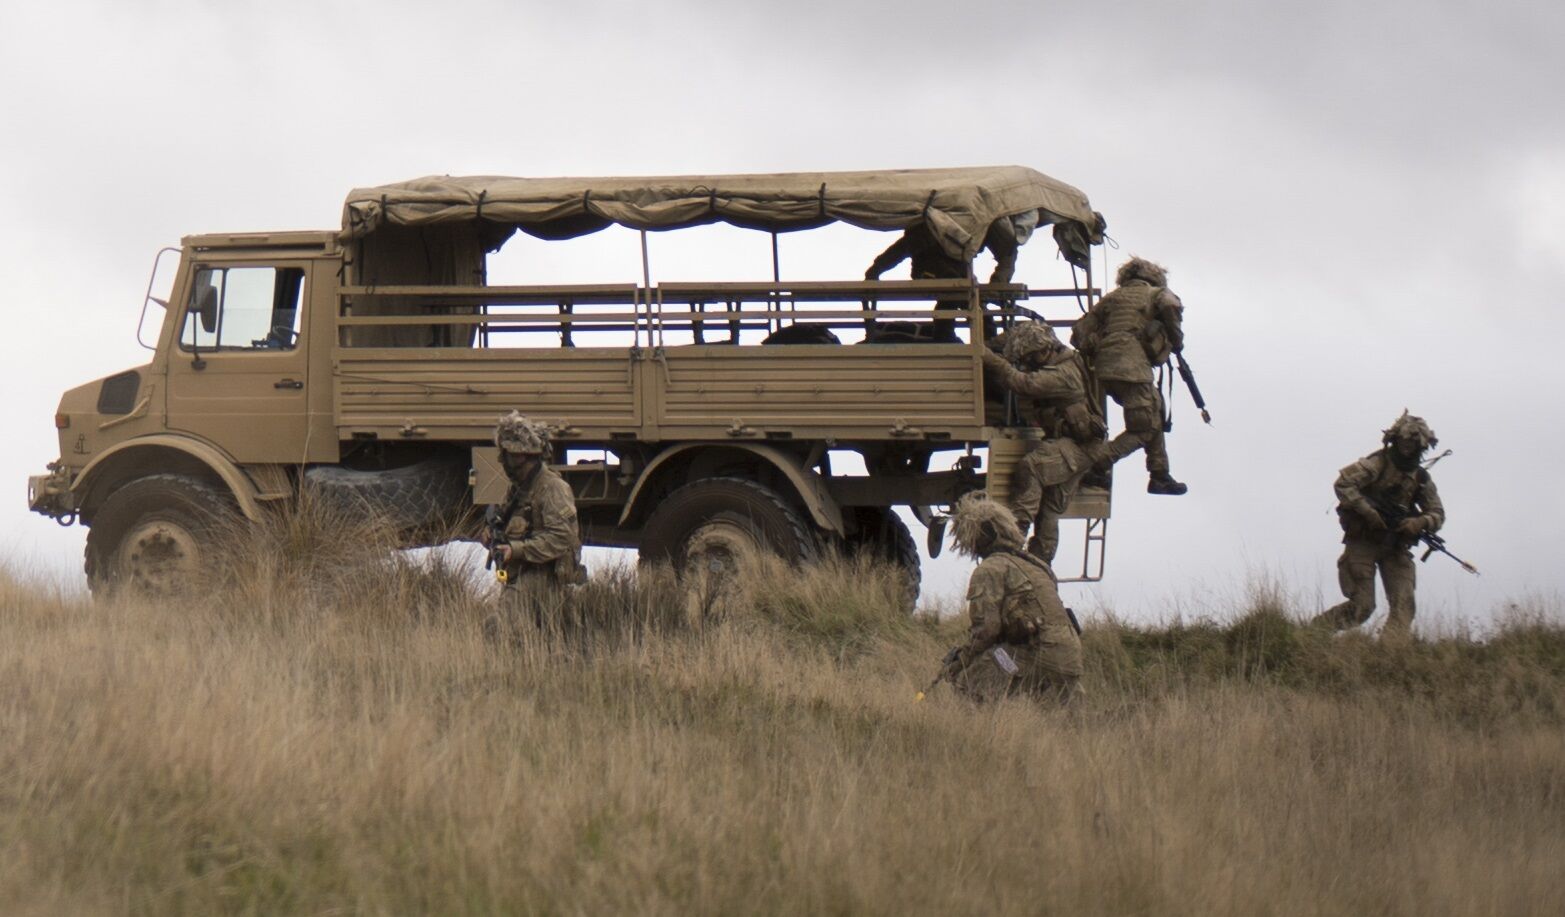 A stationary Mercedes Benz Unimog is seen in a grassland. Around its back, three camouflaged soldiers surround it and three more are jumping out of it.